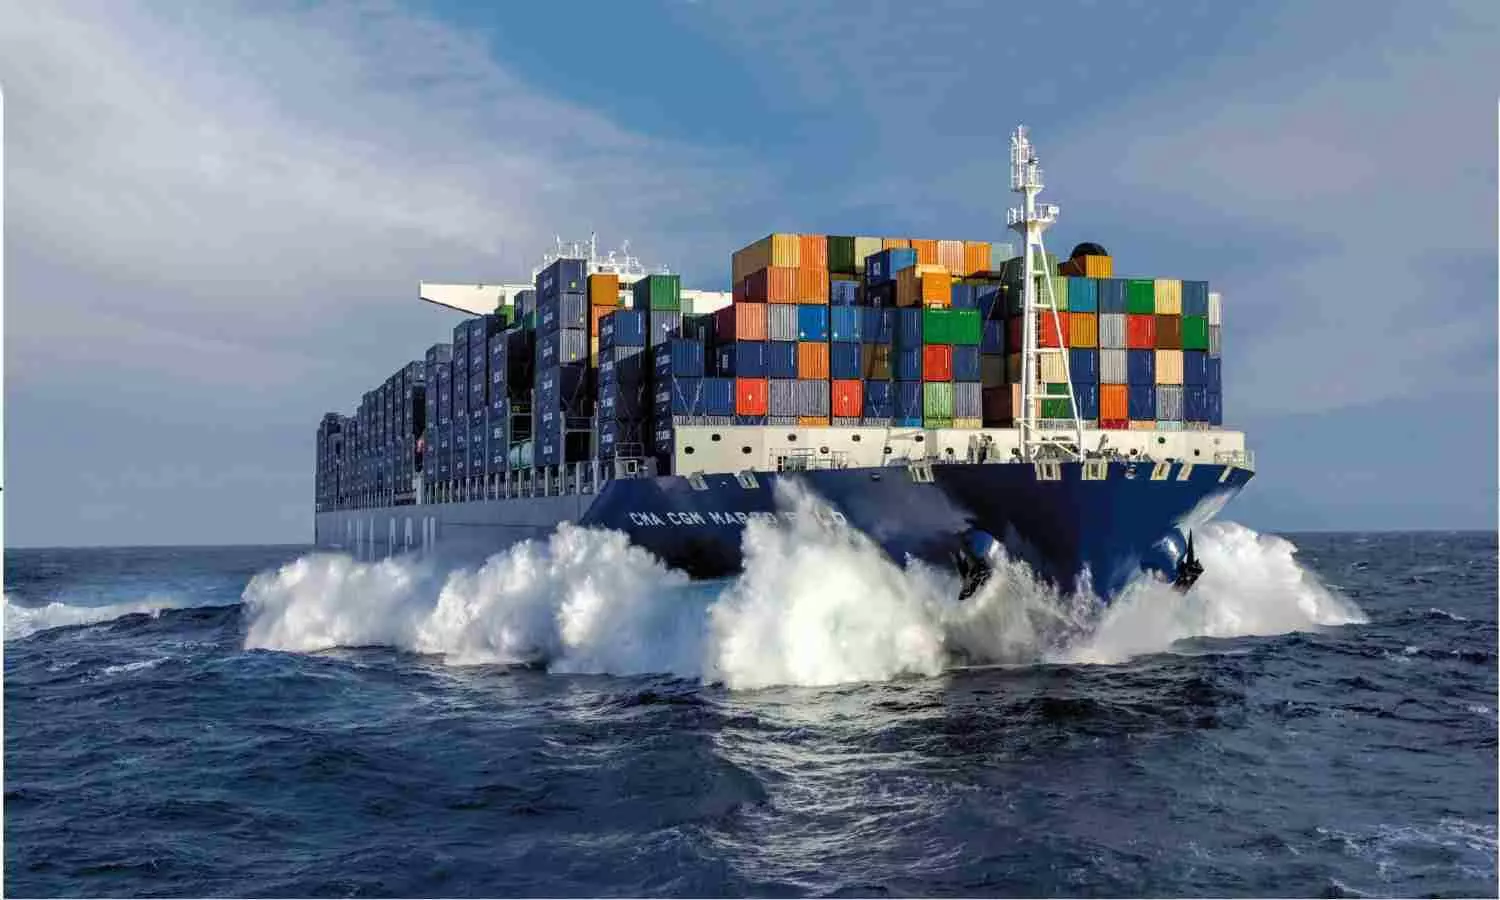 CMA CGM Group enters into exclusive discussions to acquire La Méridionale